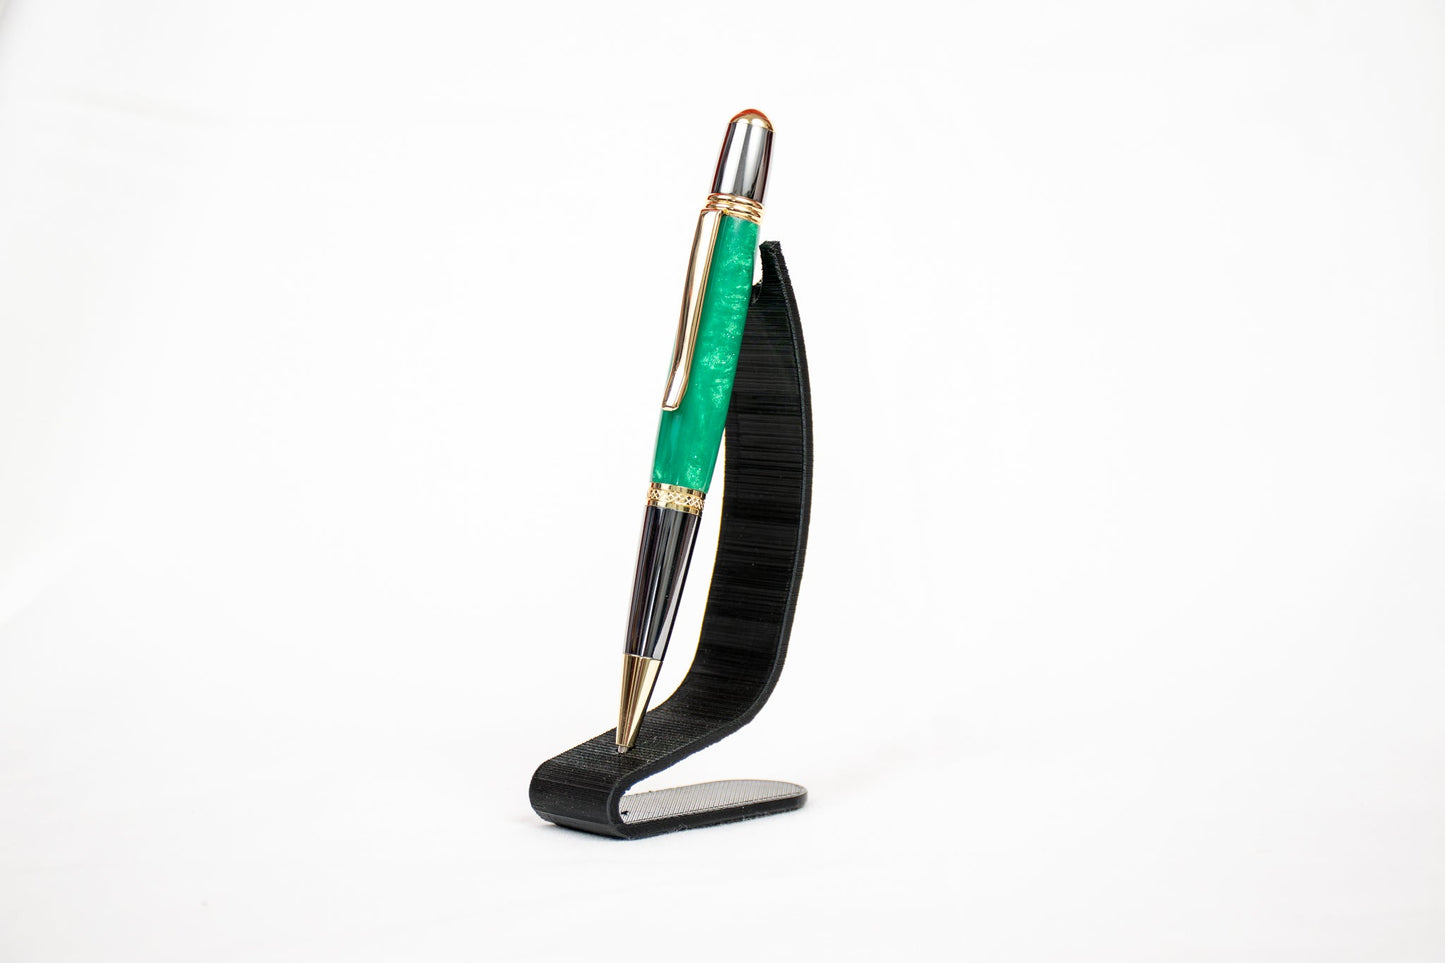 Handmade green and green sparkle resin twist pen with two-tone gunmetal and gold plating